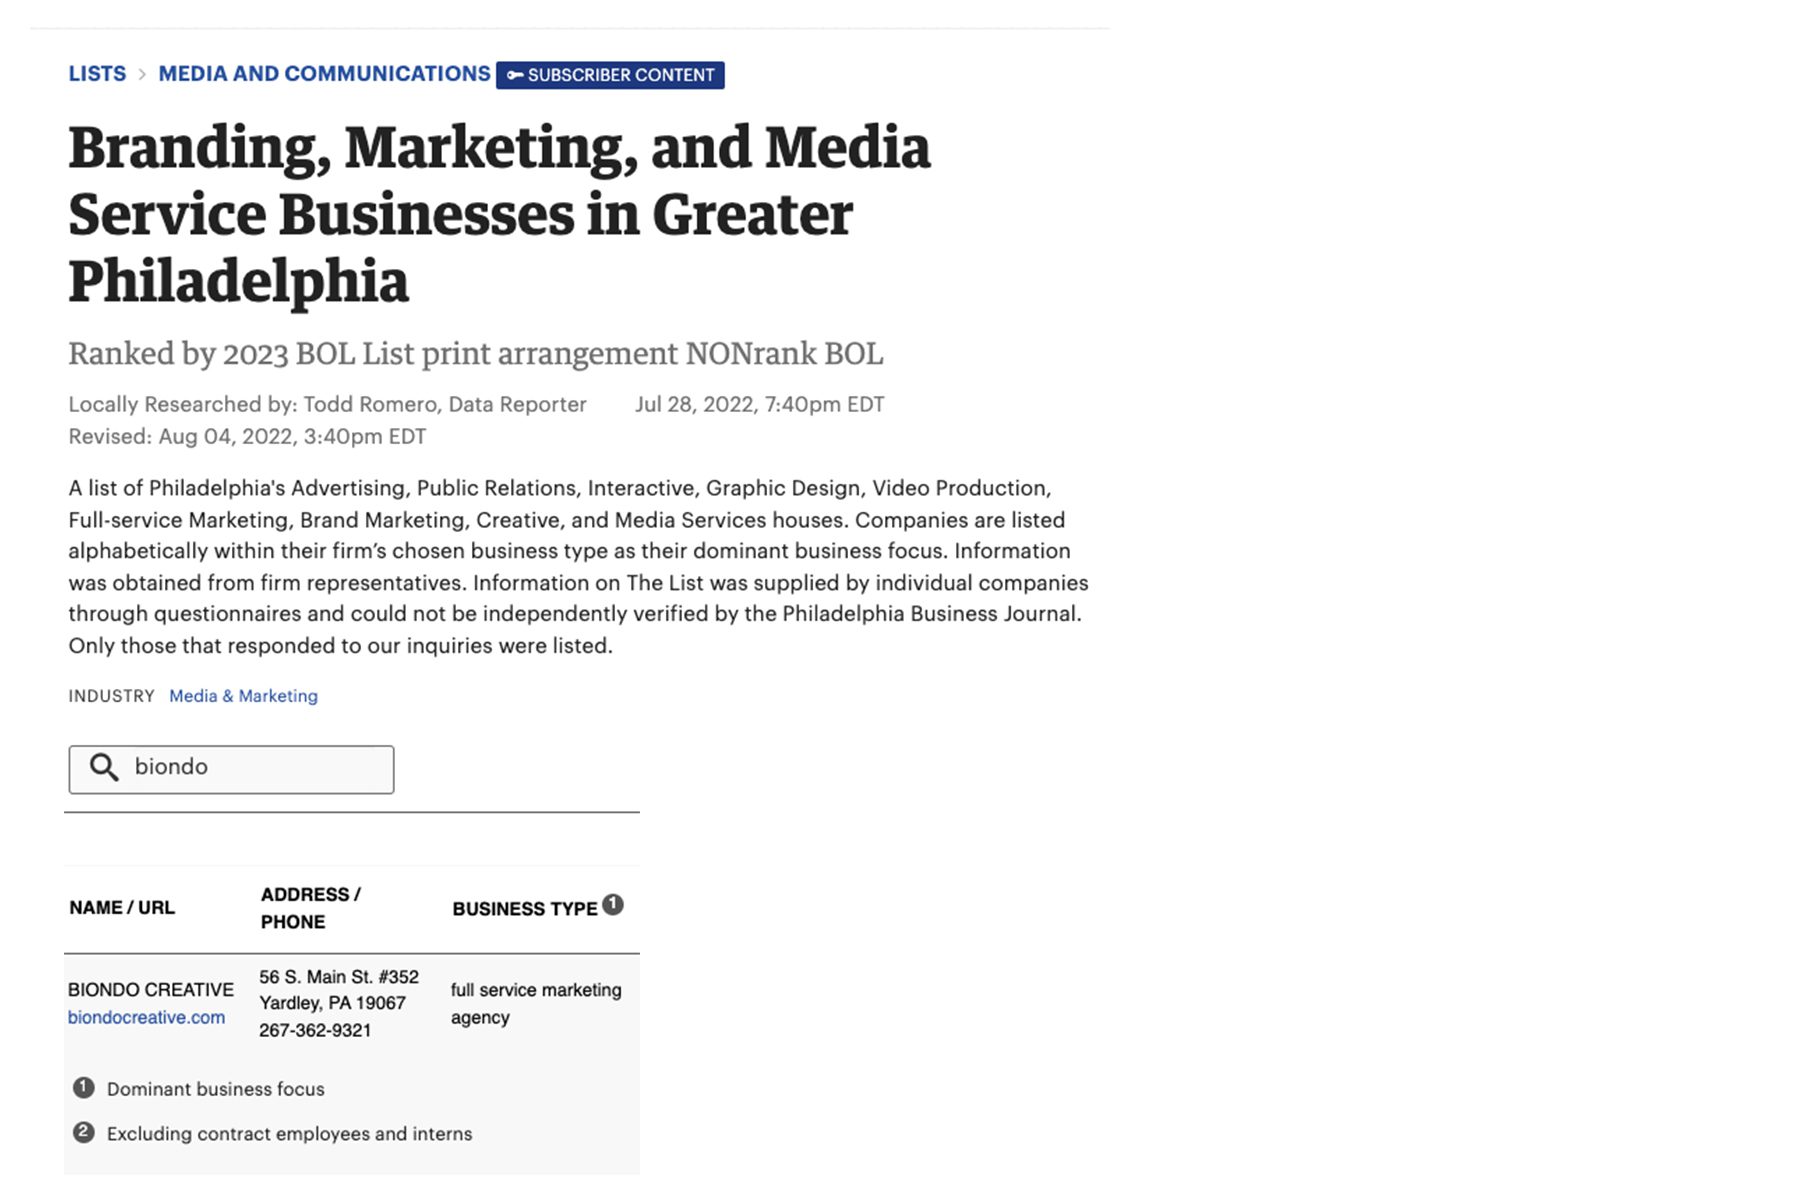 Biondo Creative is listed in the Philadelphia Business Journal's Branding, Marketing and Media Service Businesses in Greater Philadelphia